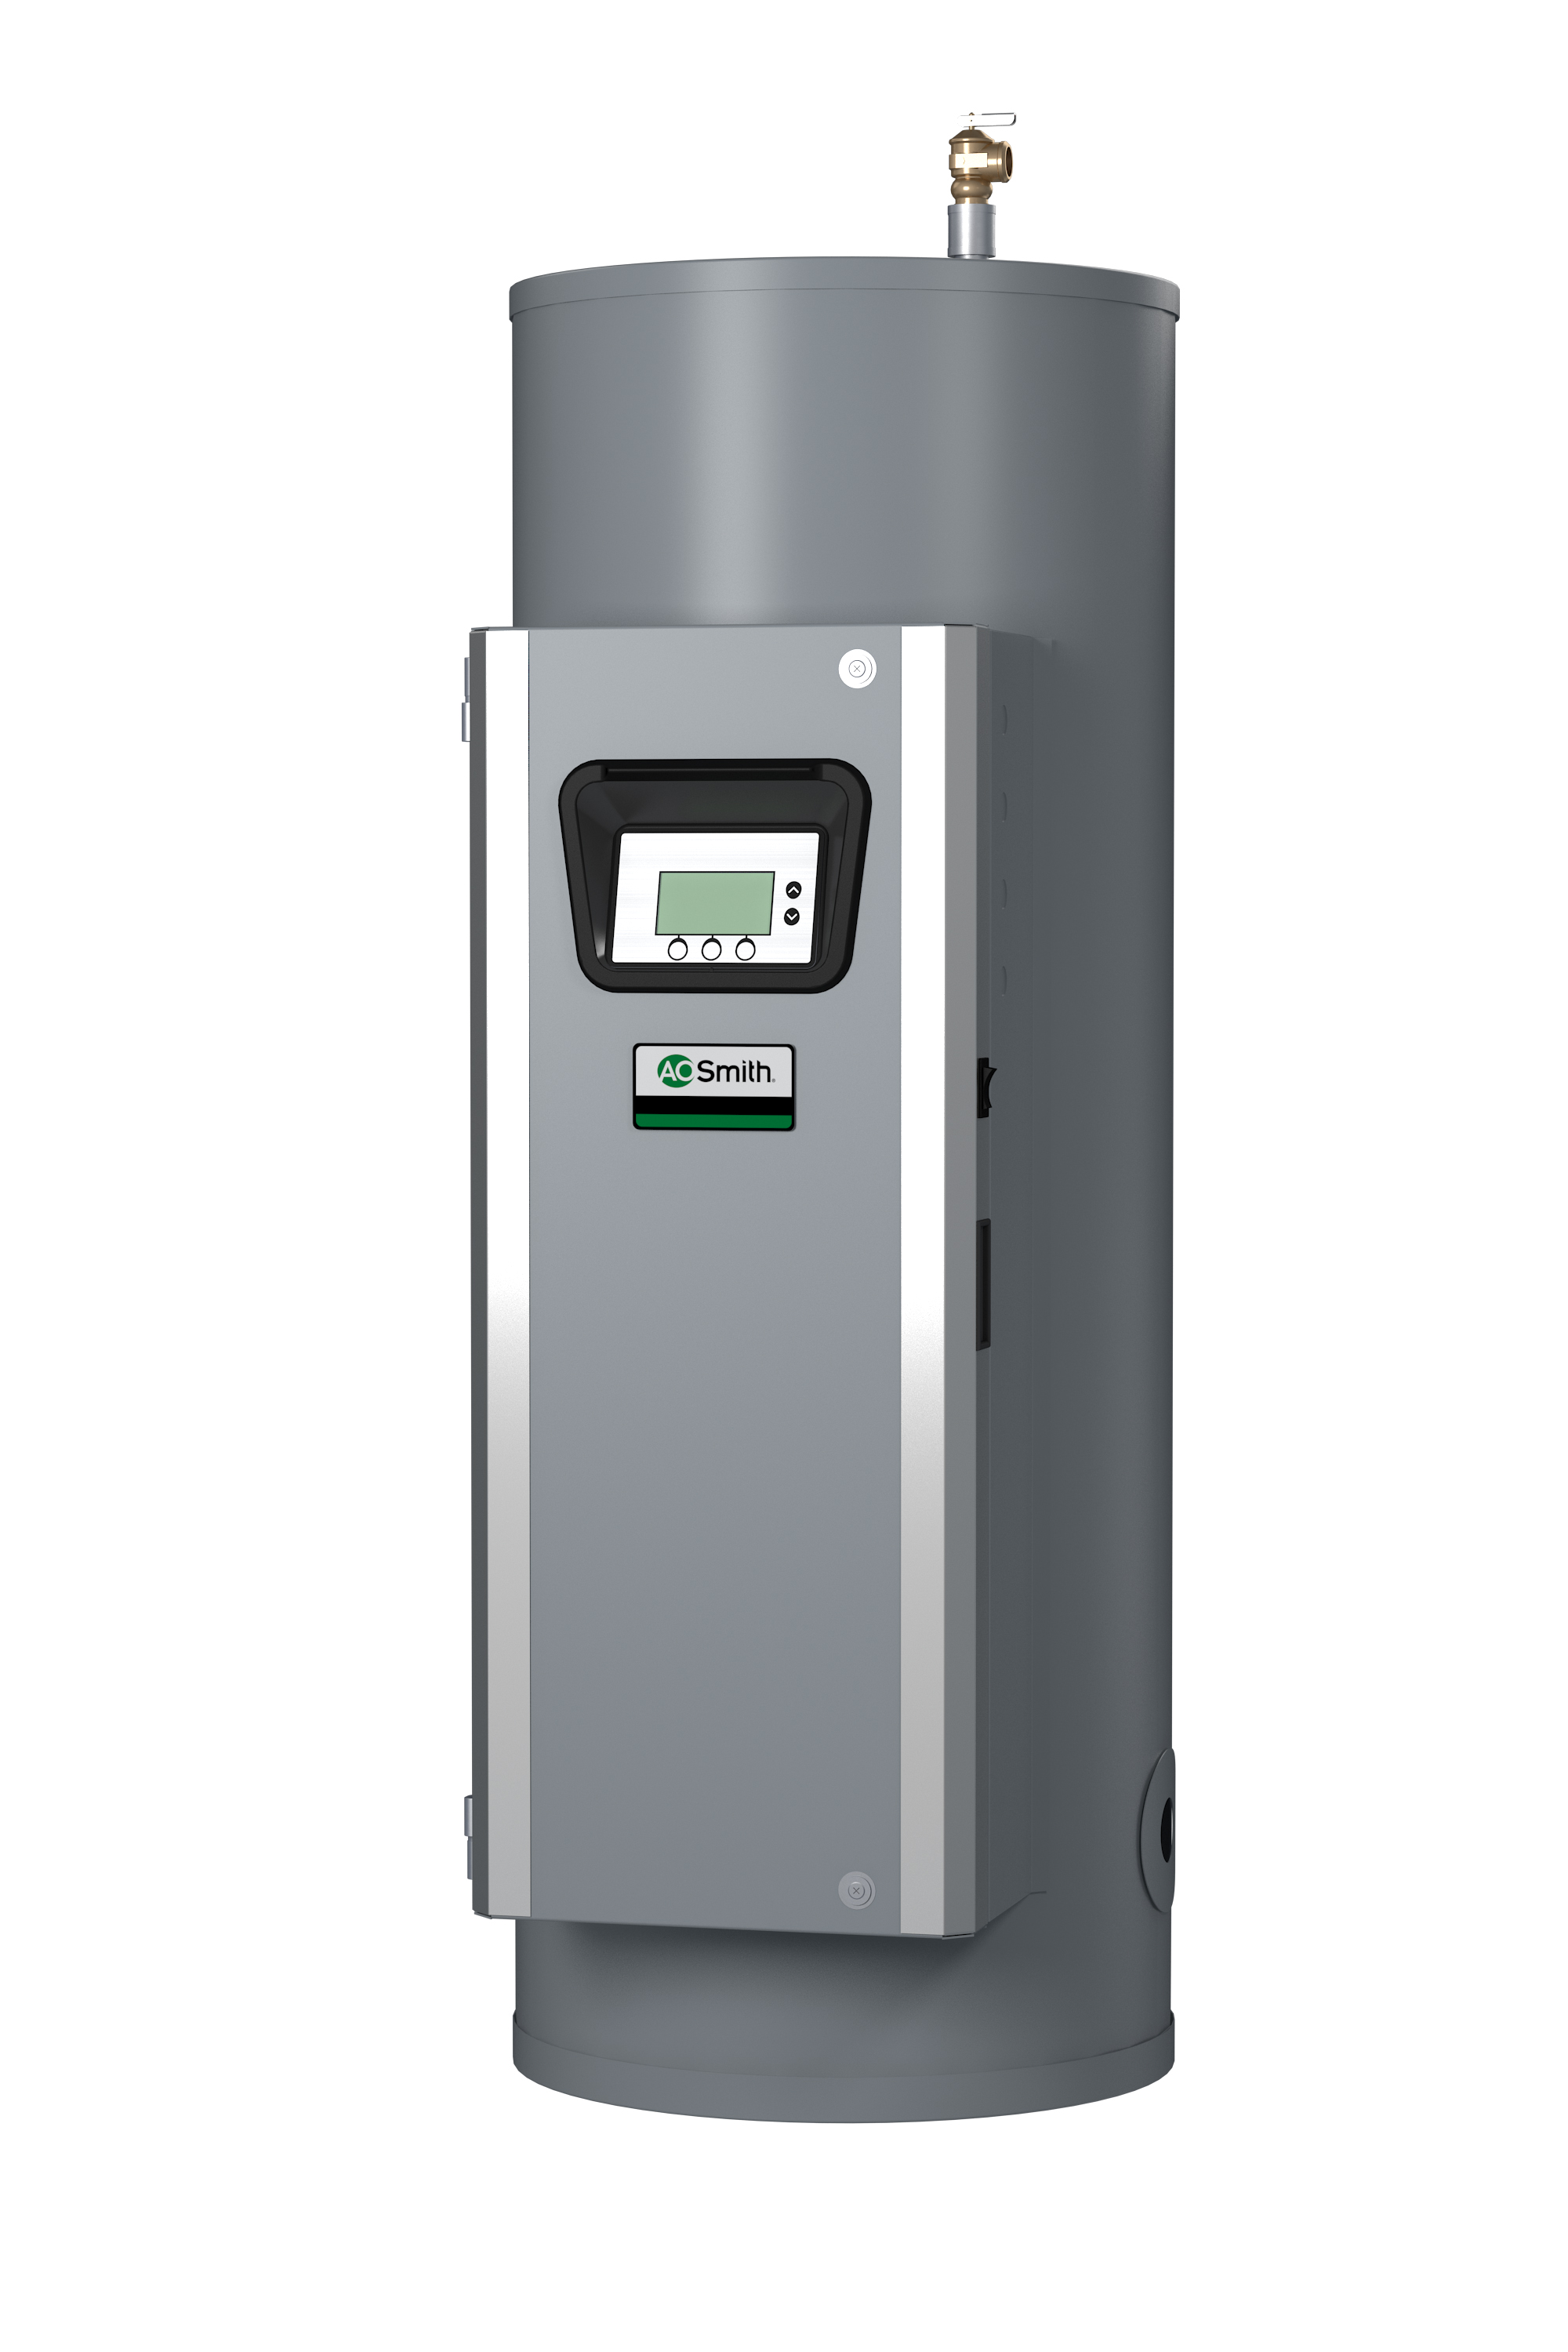 AO SMITH DSE-100A-36: 100 GALLONS, 36KW, 208 VOLT, 99.9 AMPS, 3 PHASE, 2 ELEMENTS, ASME CUSTOM Xi SERIES HEAVY DUTY COMMERCIAL ELECTRIC WATER HEATER